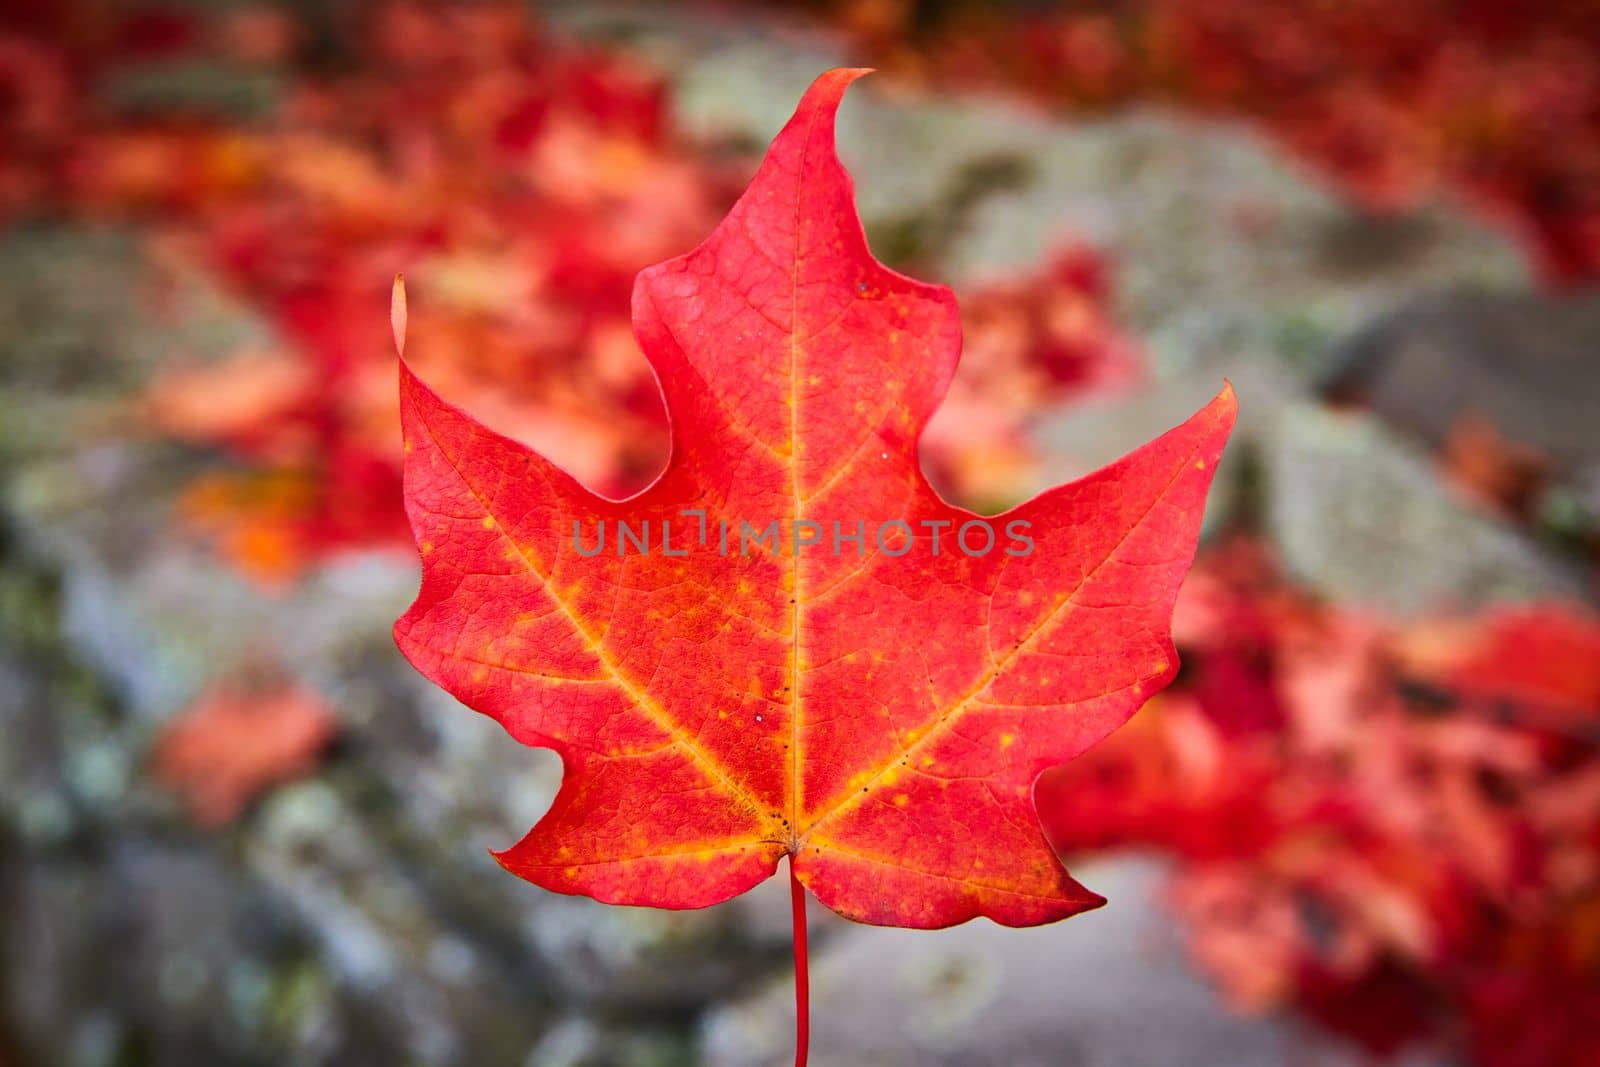 Focus on single perfect red fall leaf in center with grey and red soft background by njproductions